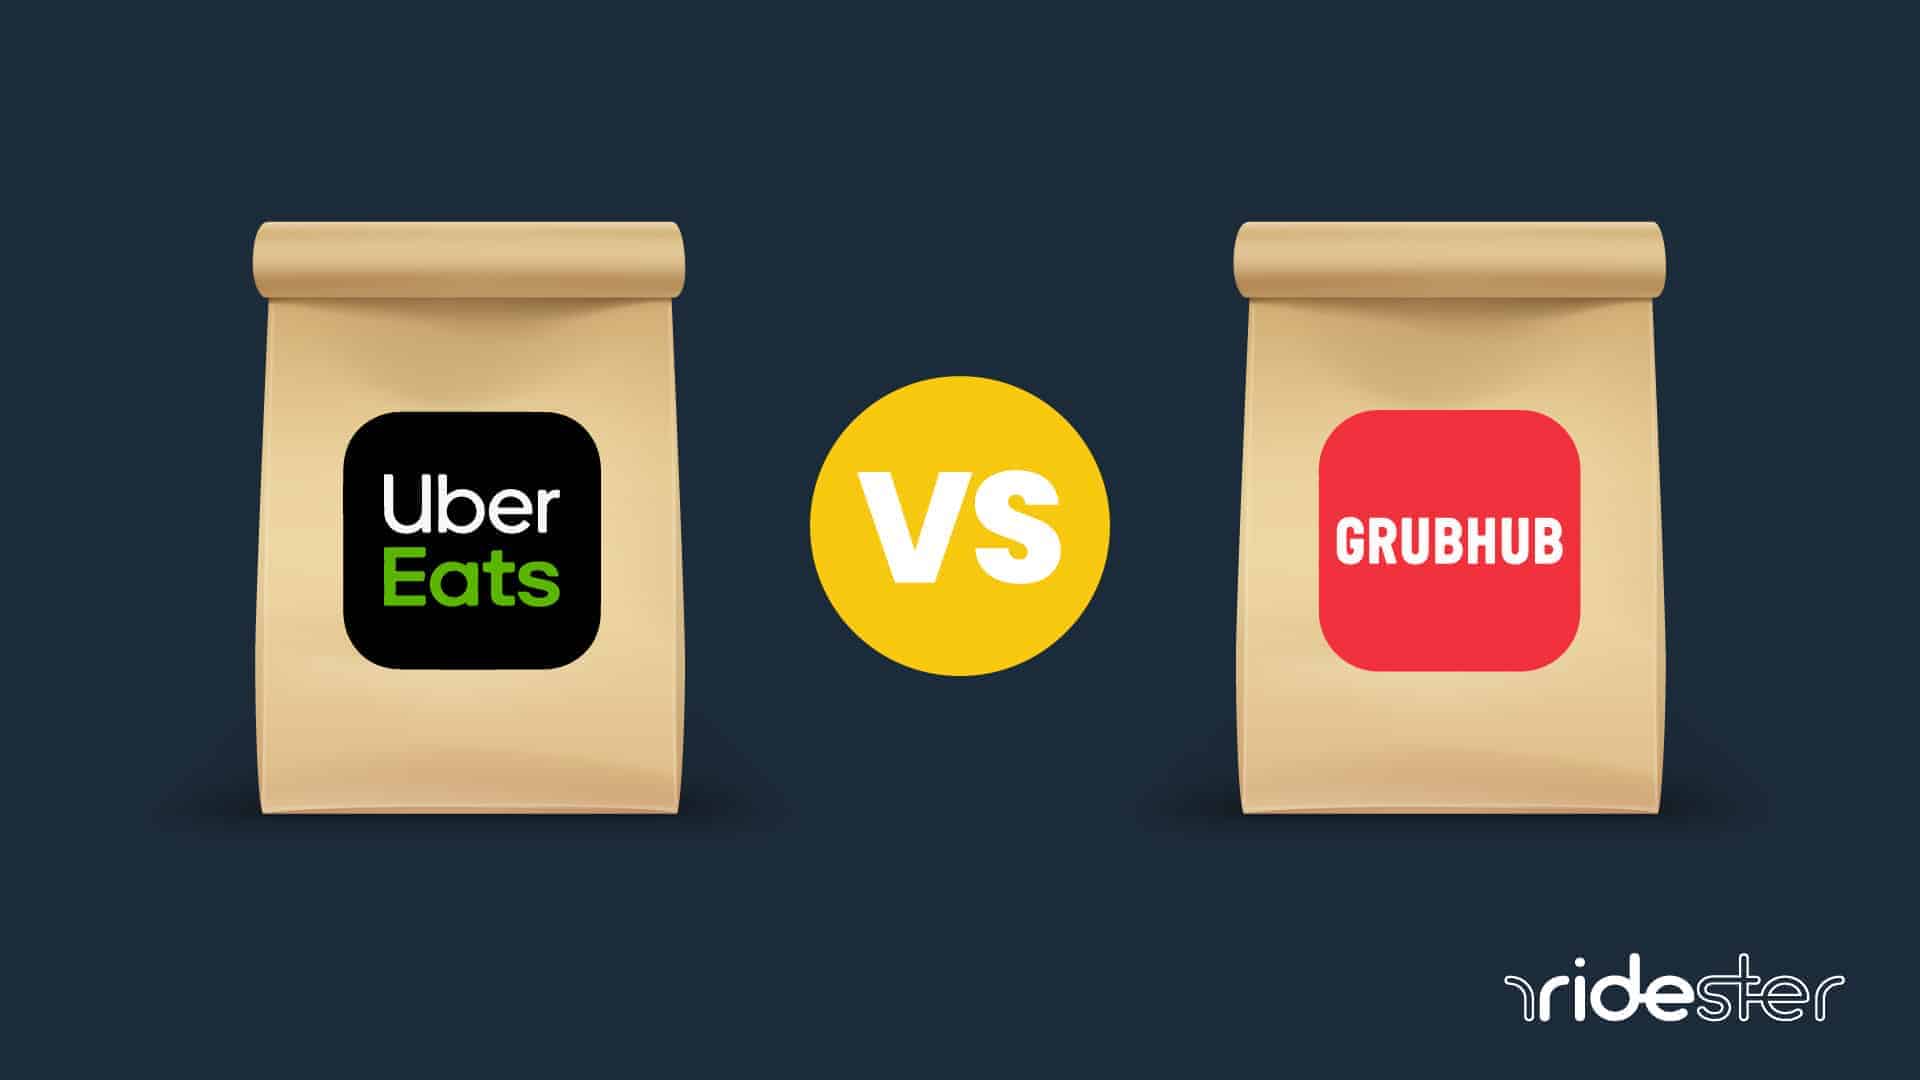 vector graphics image showing grubhub vs uber eats bags next to one another